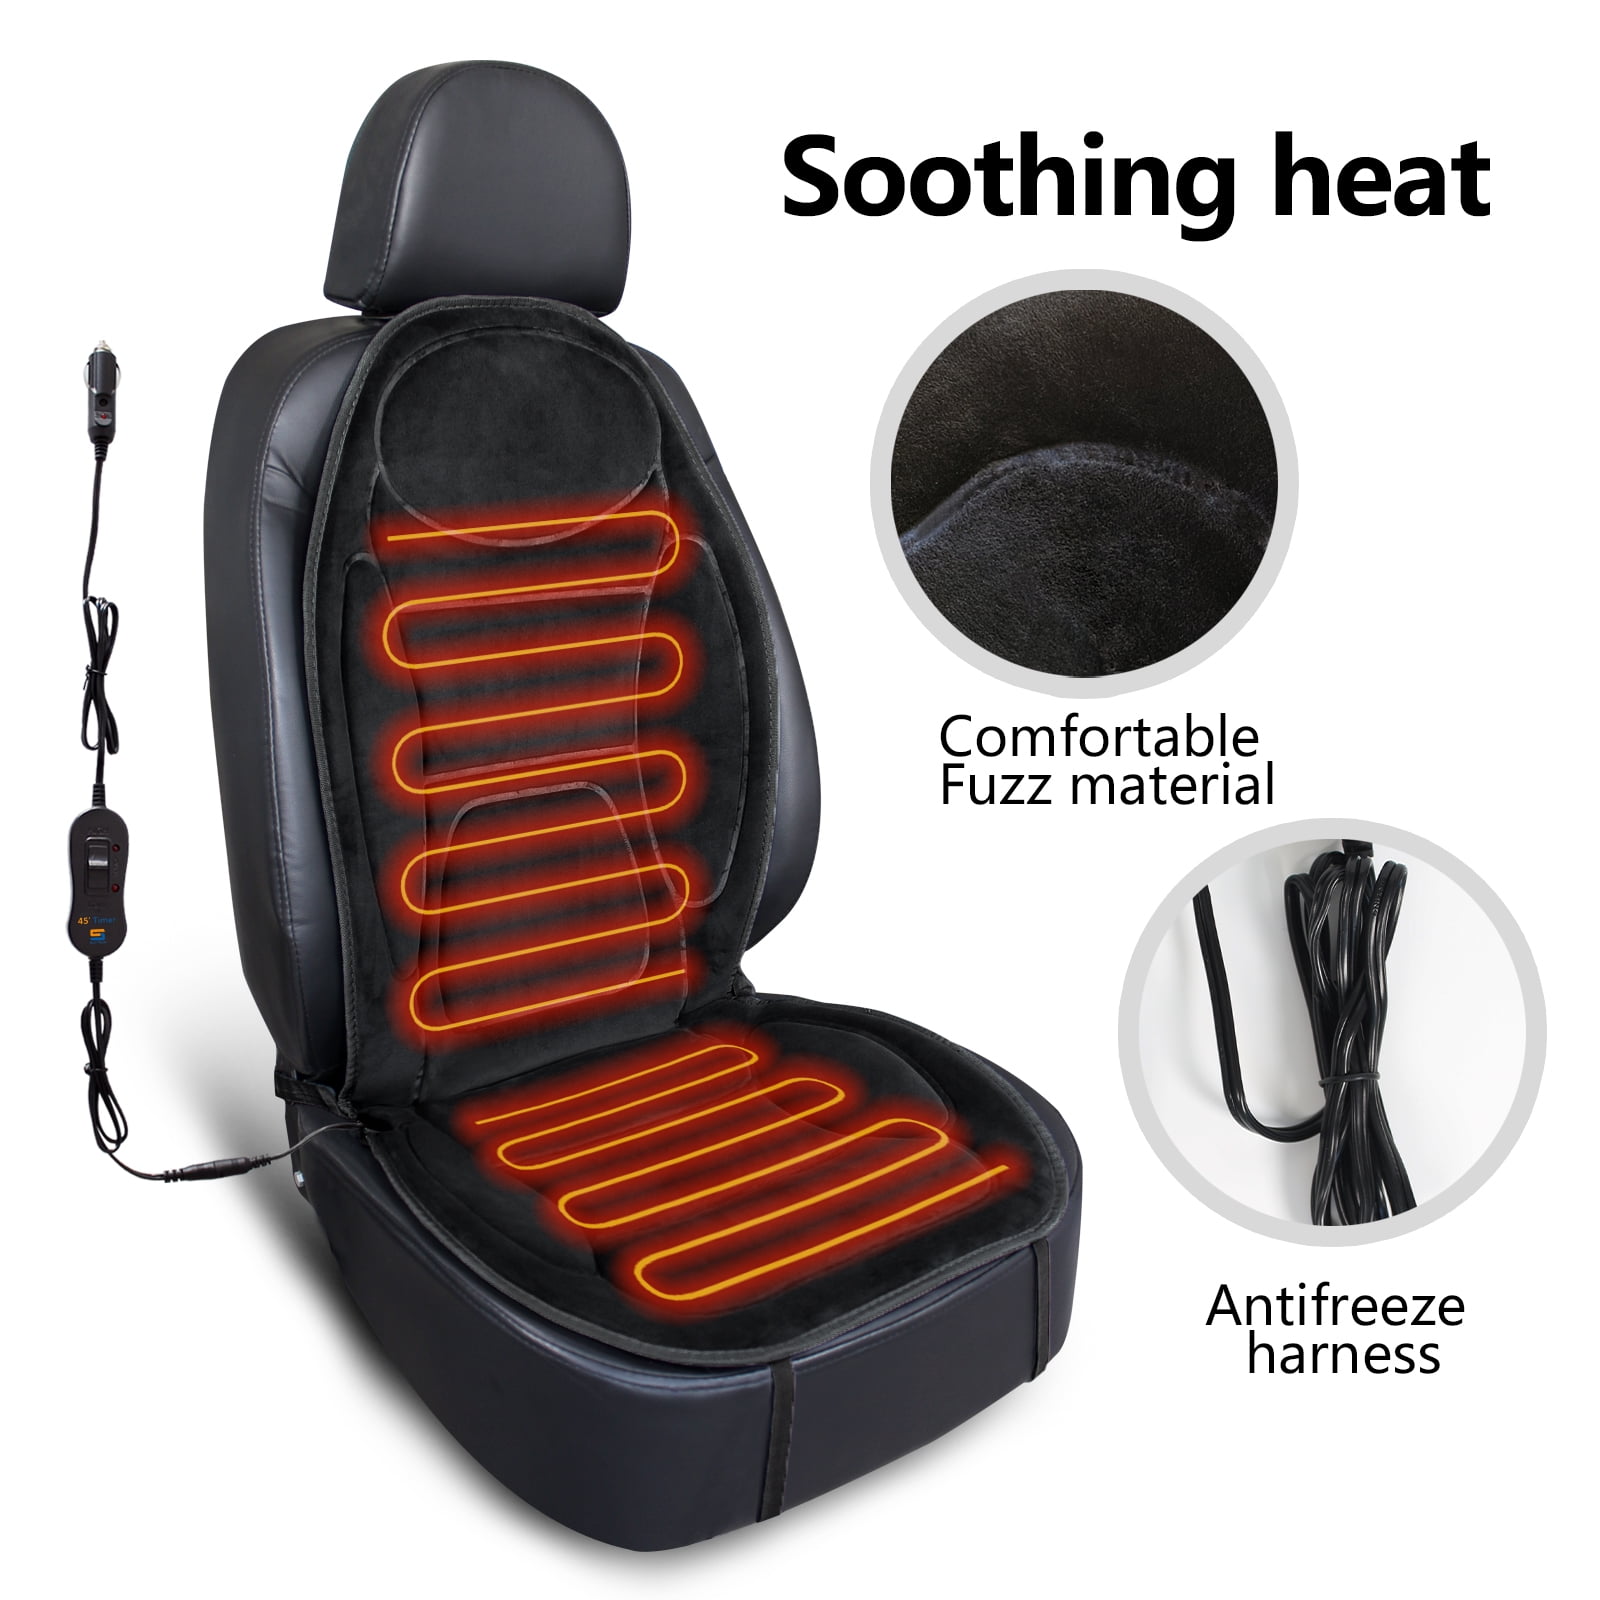 Sojoy Heated Car Seat Cover-Universal 12V Seat Warmer with High/Medium/Low Temp Switch,45 Minutes Auto Off Timer by Sojoy SJ154G